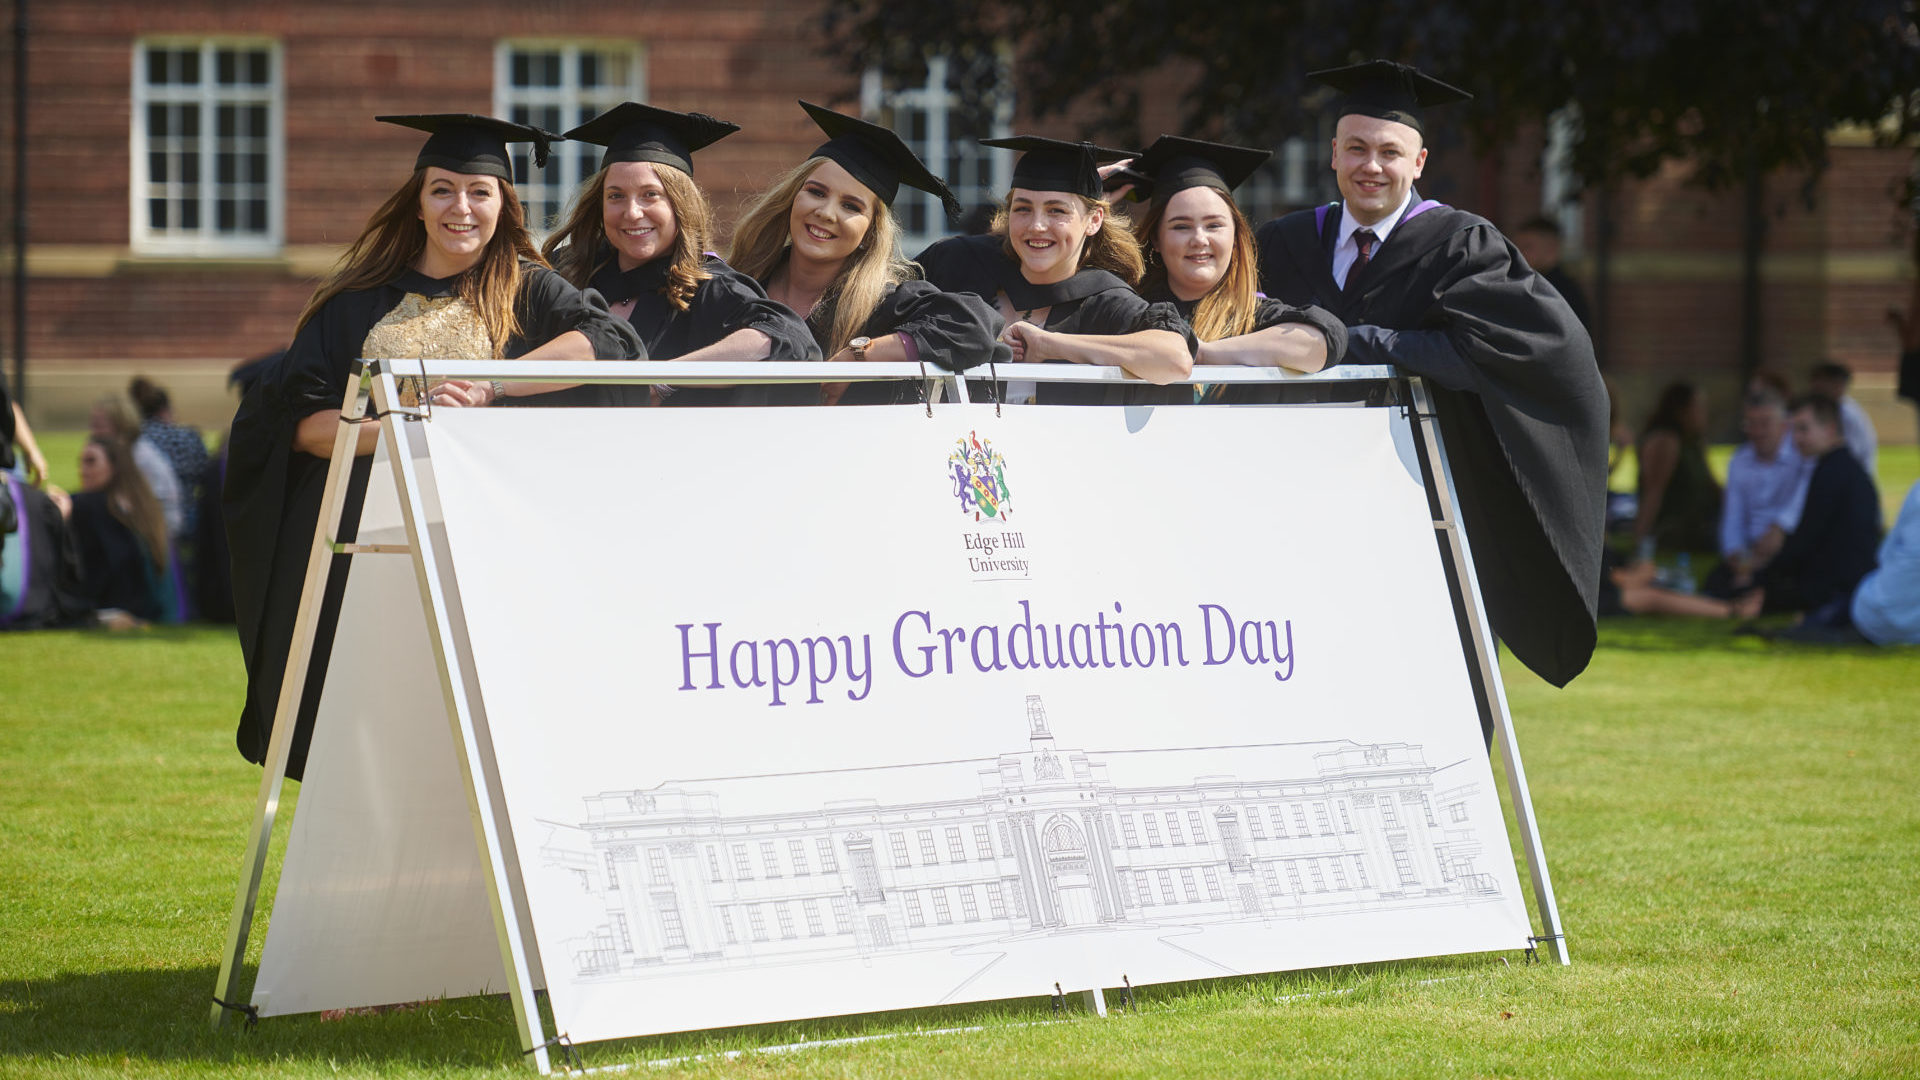 Graduates in front of Happy Graduation Day sign. Clive Myrie James Timpson Sir Terry Leahy Edge Hill graduation.